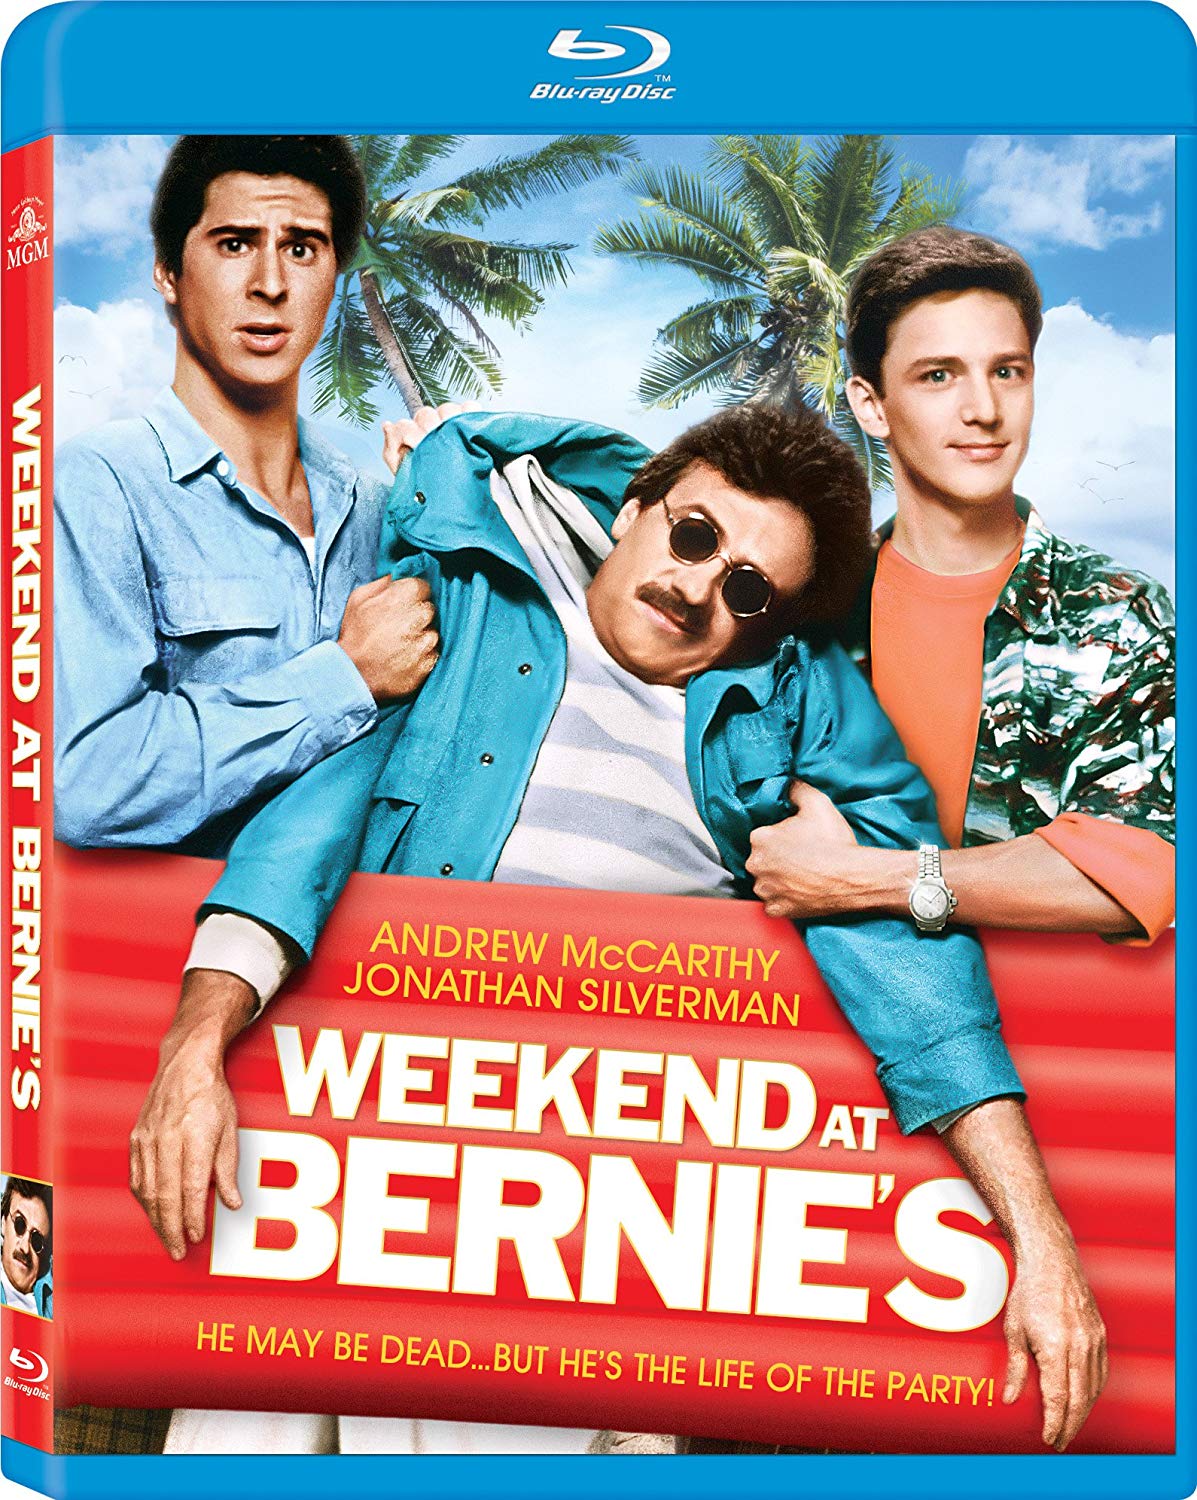 weekend at bernies - Tm Bluray Disc 29 V Weekend At Bernie'S Andrew Mccarthy Jonathan Silverman Weekenda Vbernie'S He May Be Dead...But He'S The Life Of The Party! Bluray Disc